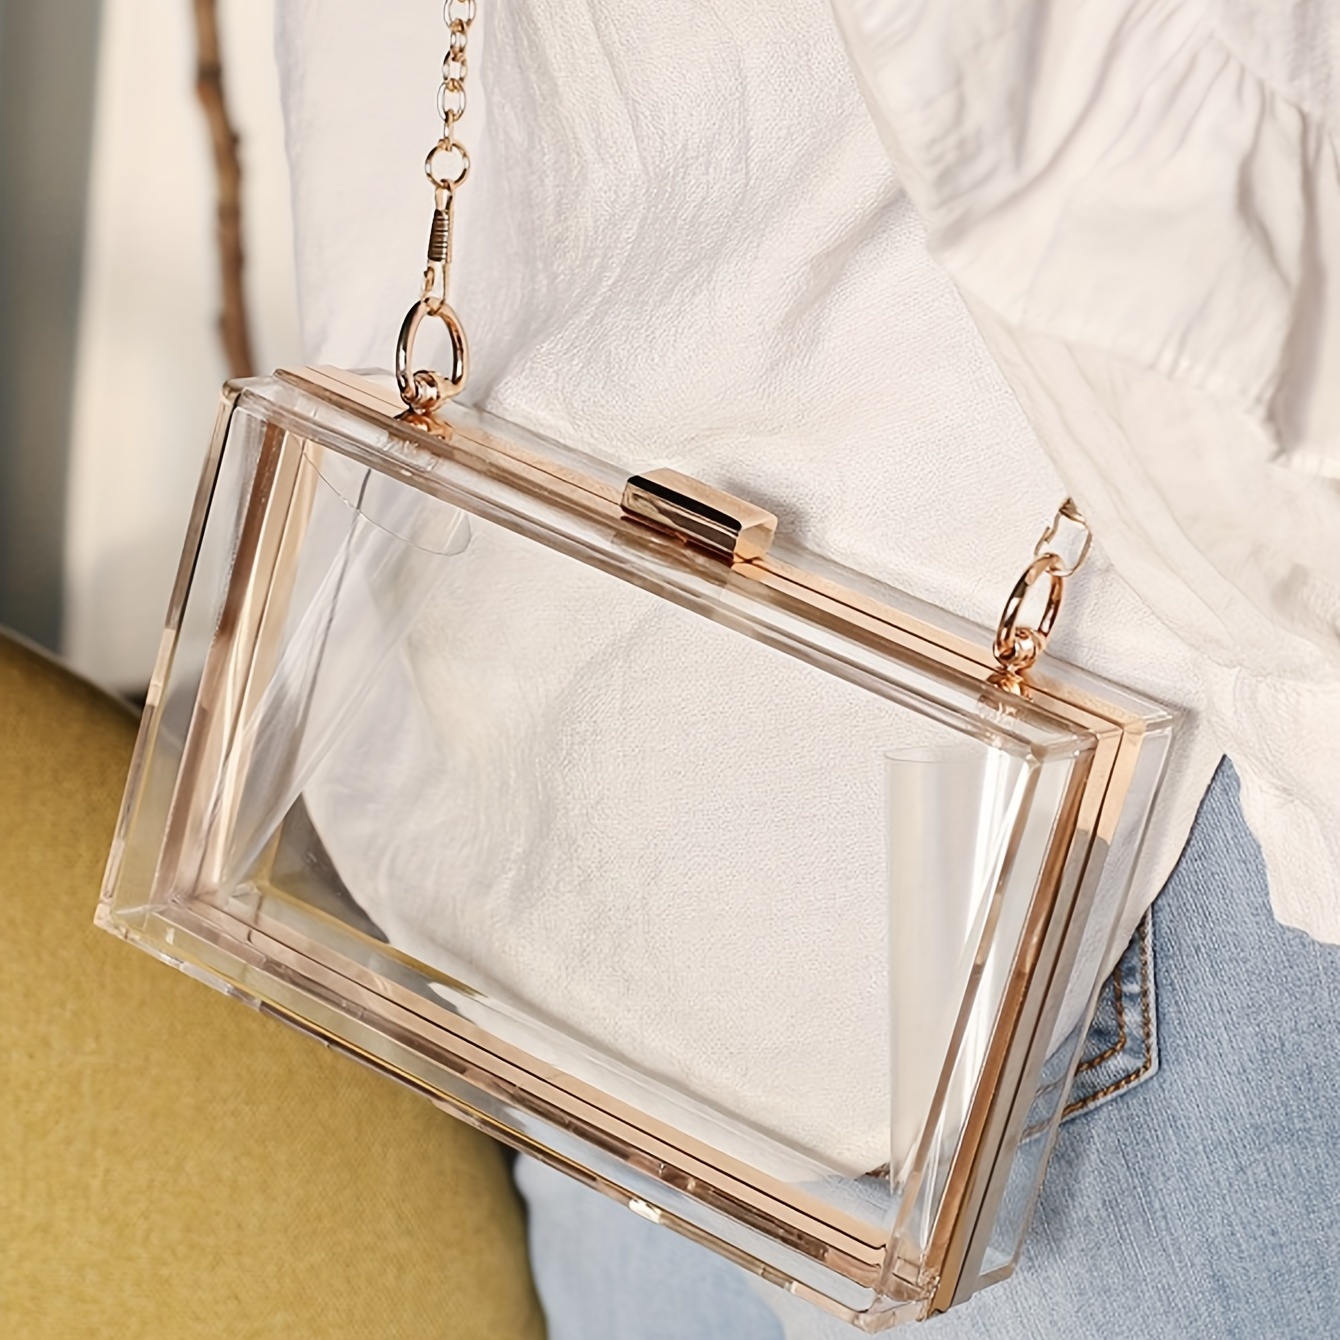 Mini Clear Square Acrylic Bag, All-match Clutch Evening Bag With